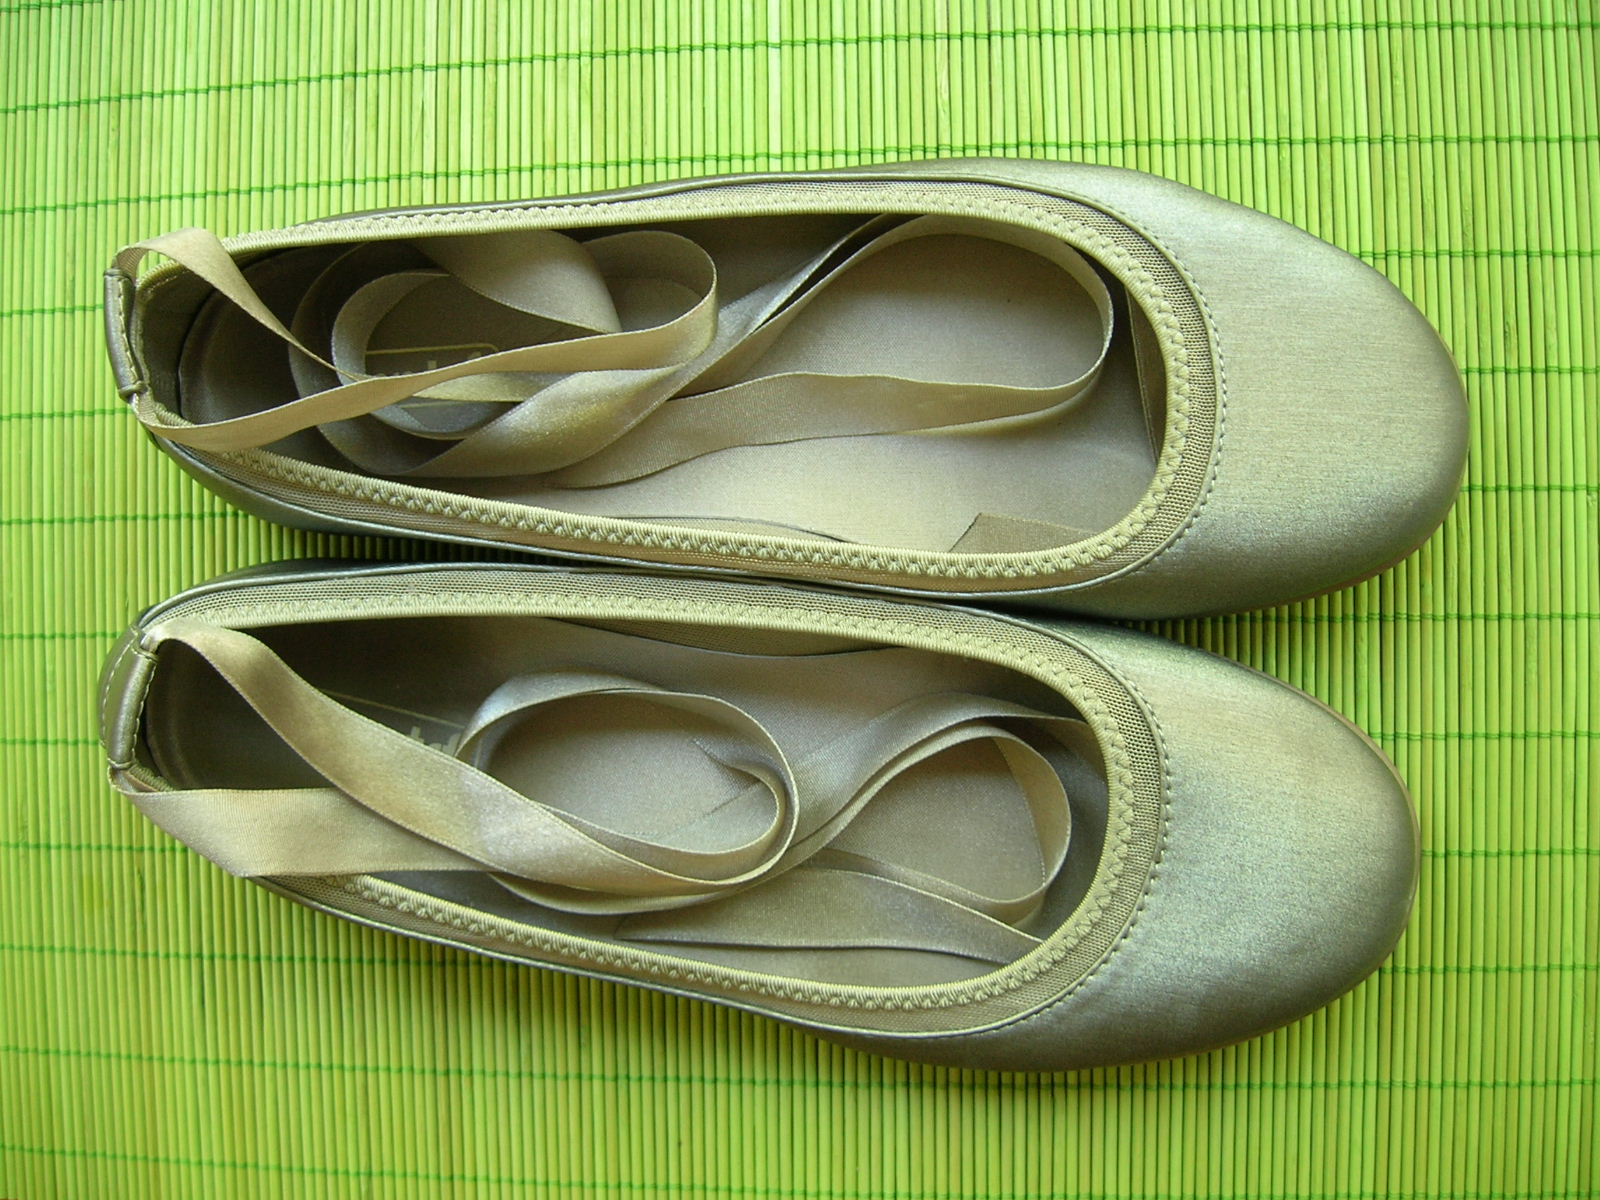 pair of beige shoes on a green placemat